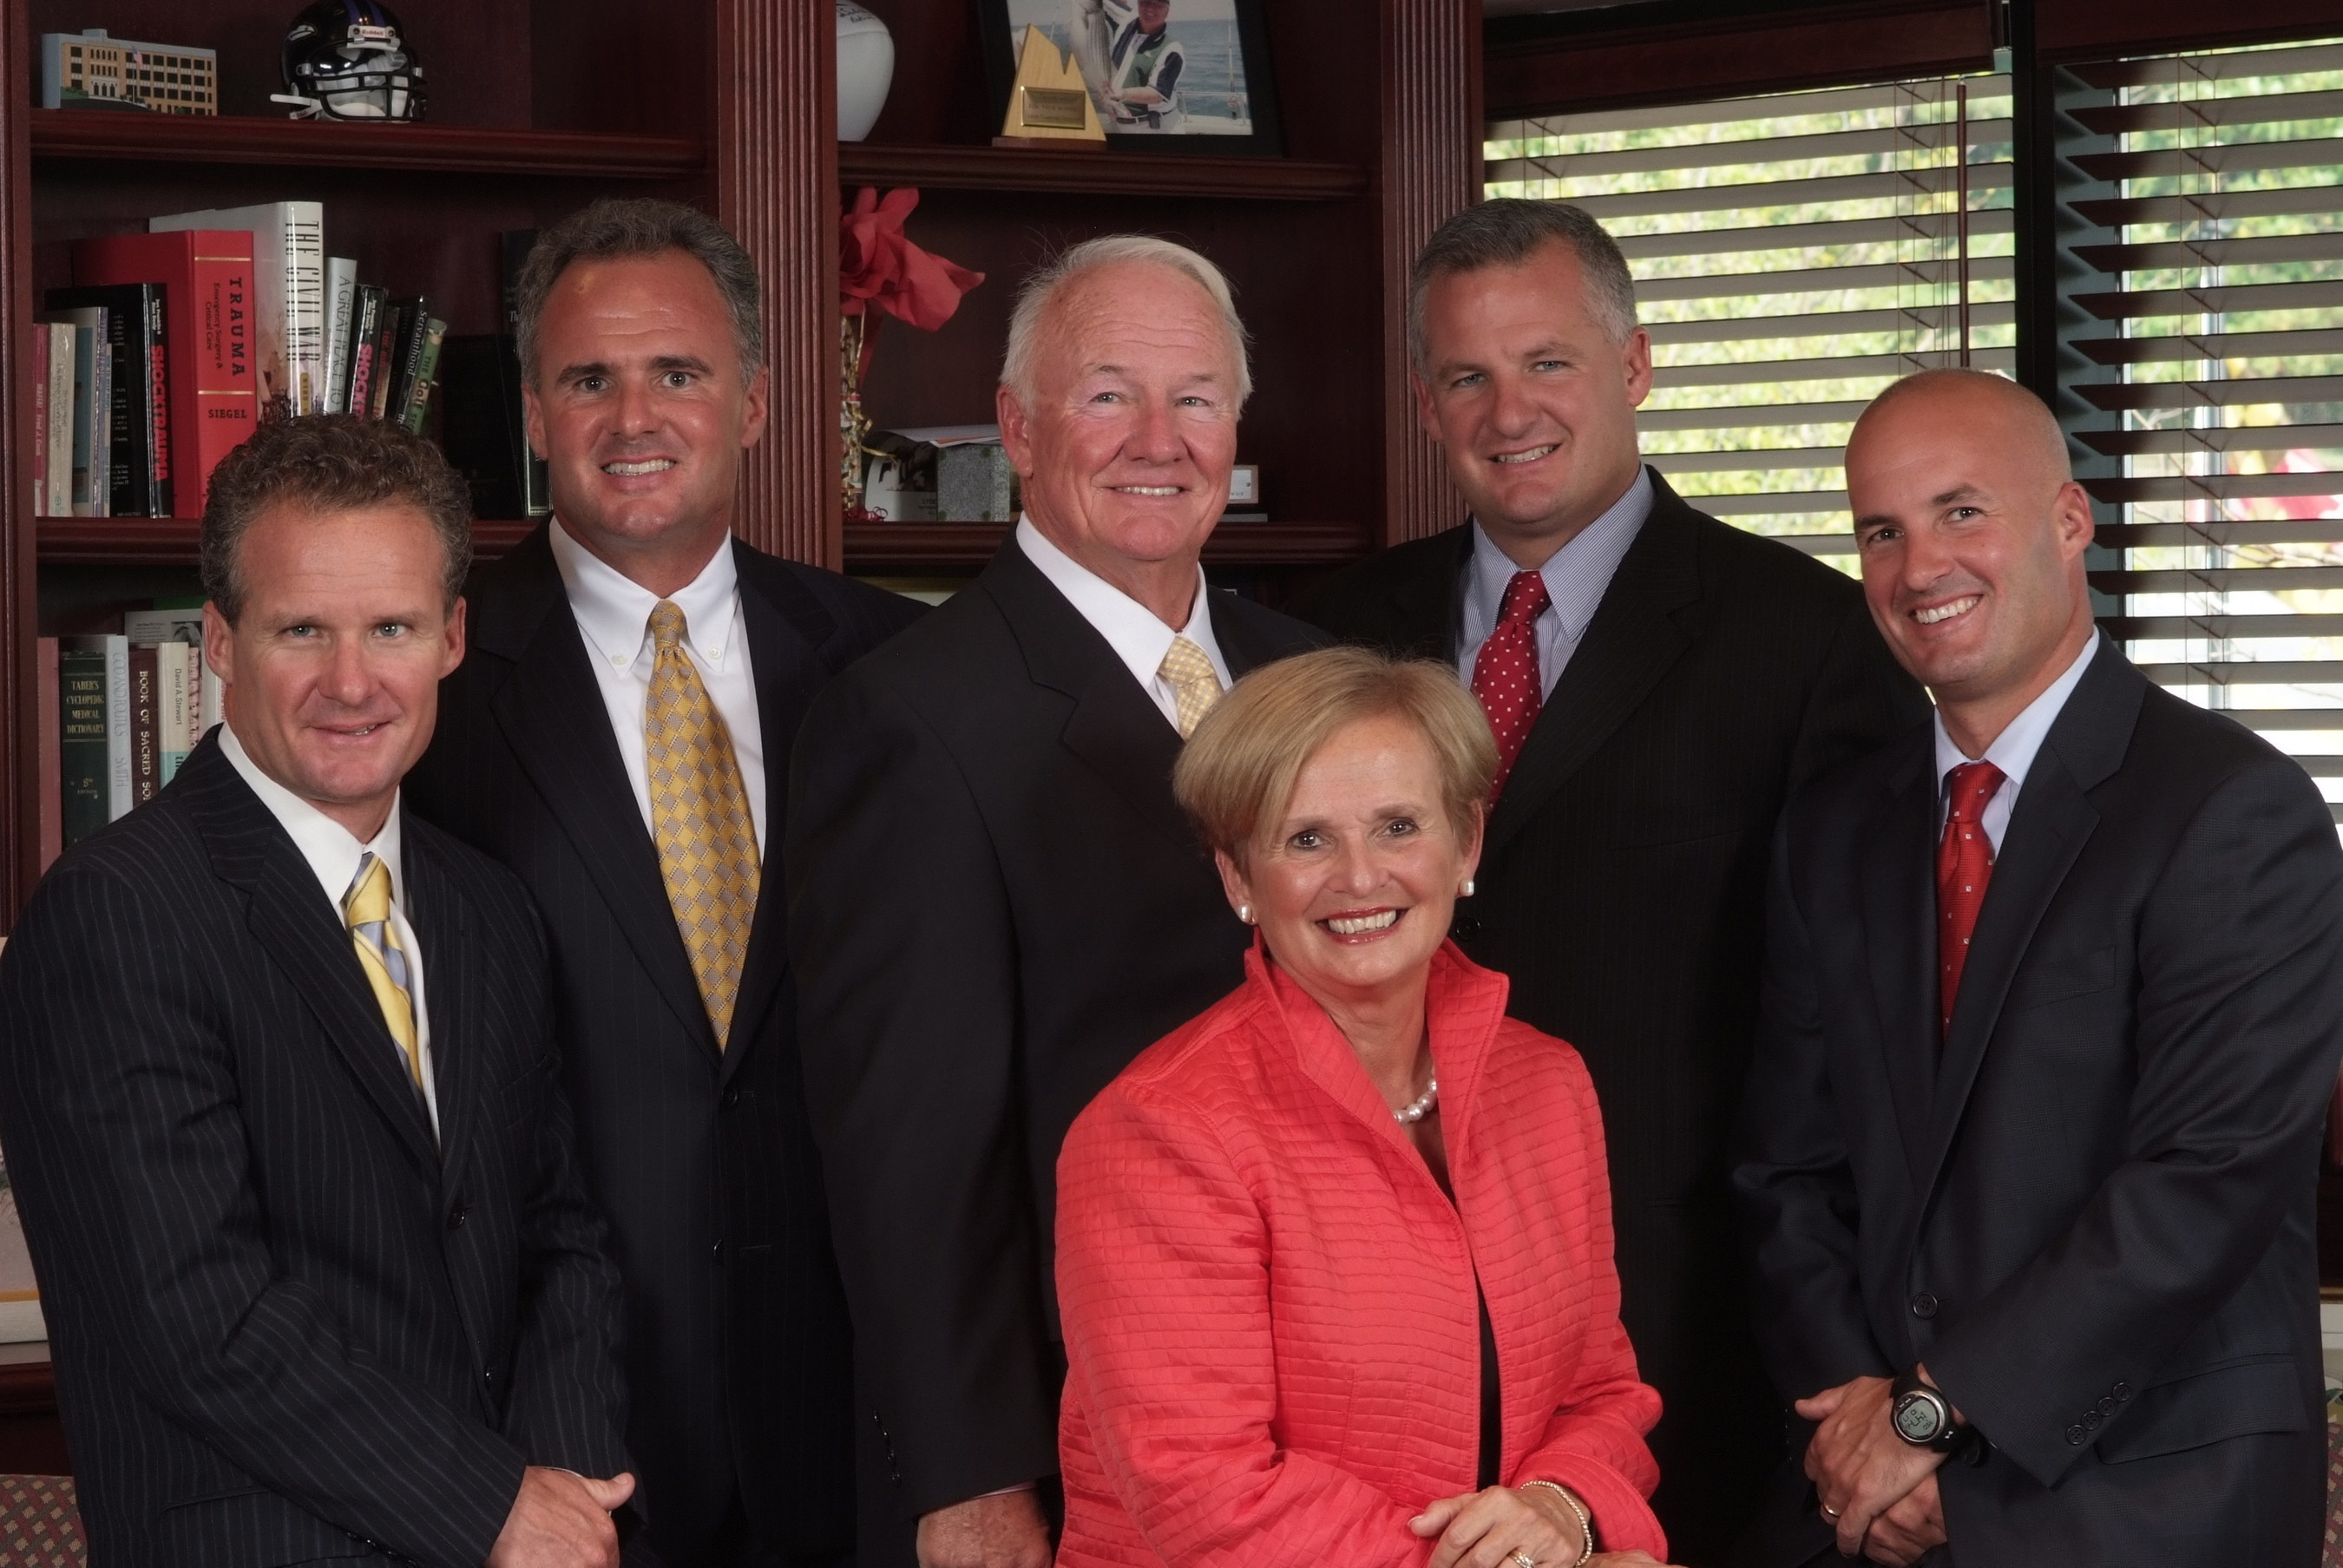 The Kelly Family: Former Senator Francis X. Kelly and his wife, Janet, with their four sons (from left): John, Frank III, David and Bryan